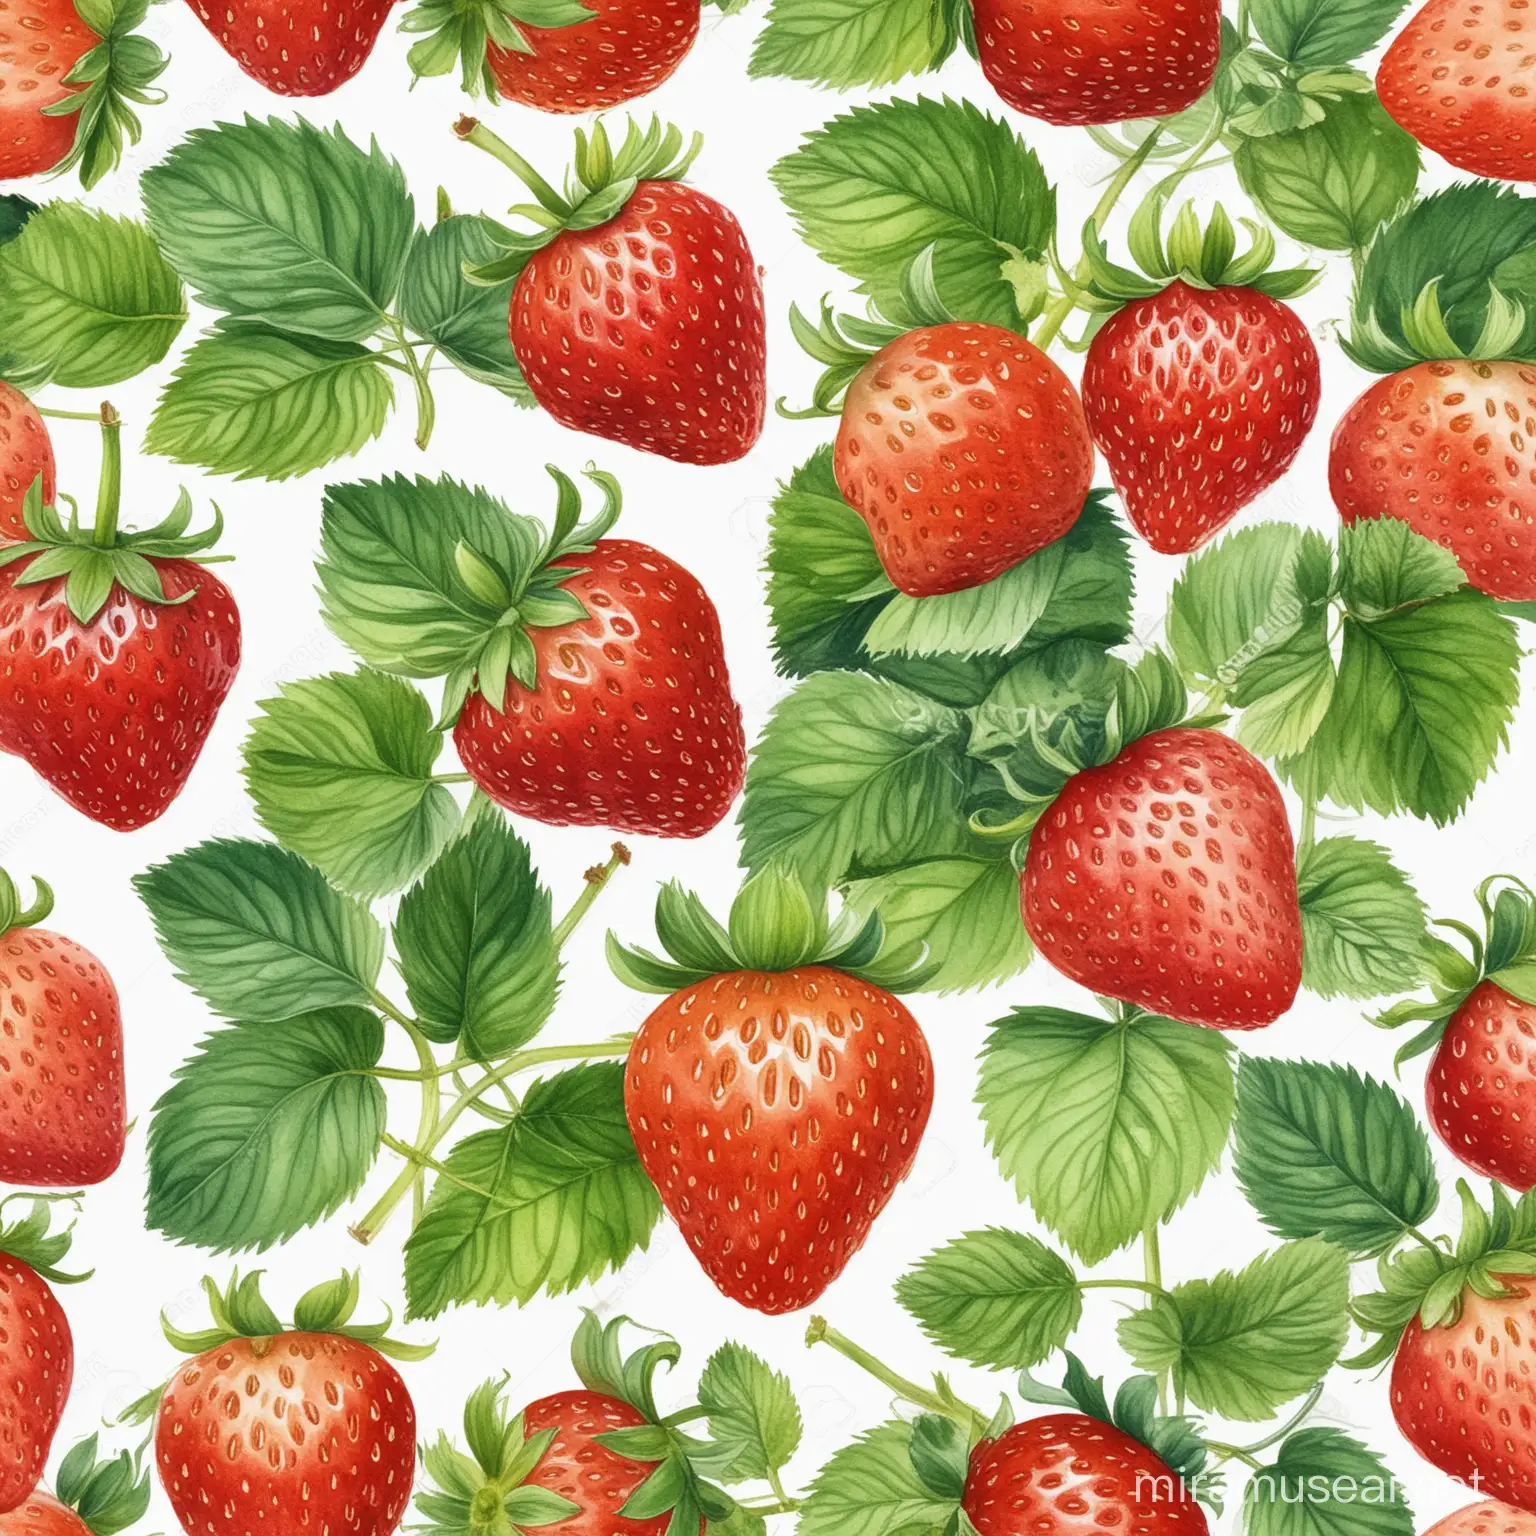 Strawberries in Watercolor Fresh Realistic High Definition Illustration on White Background